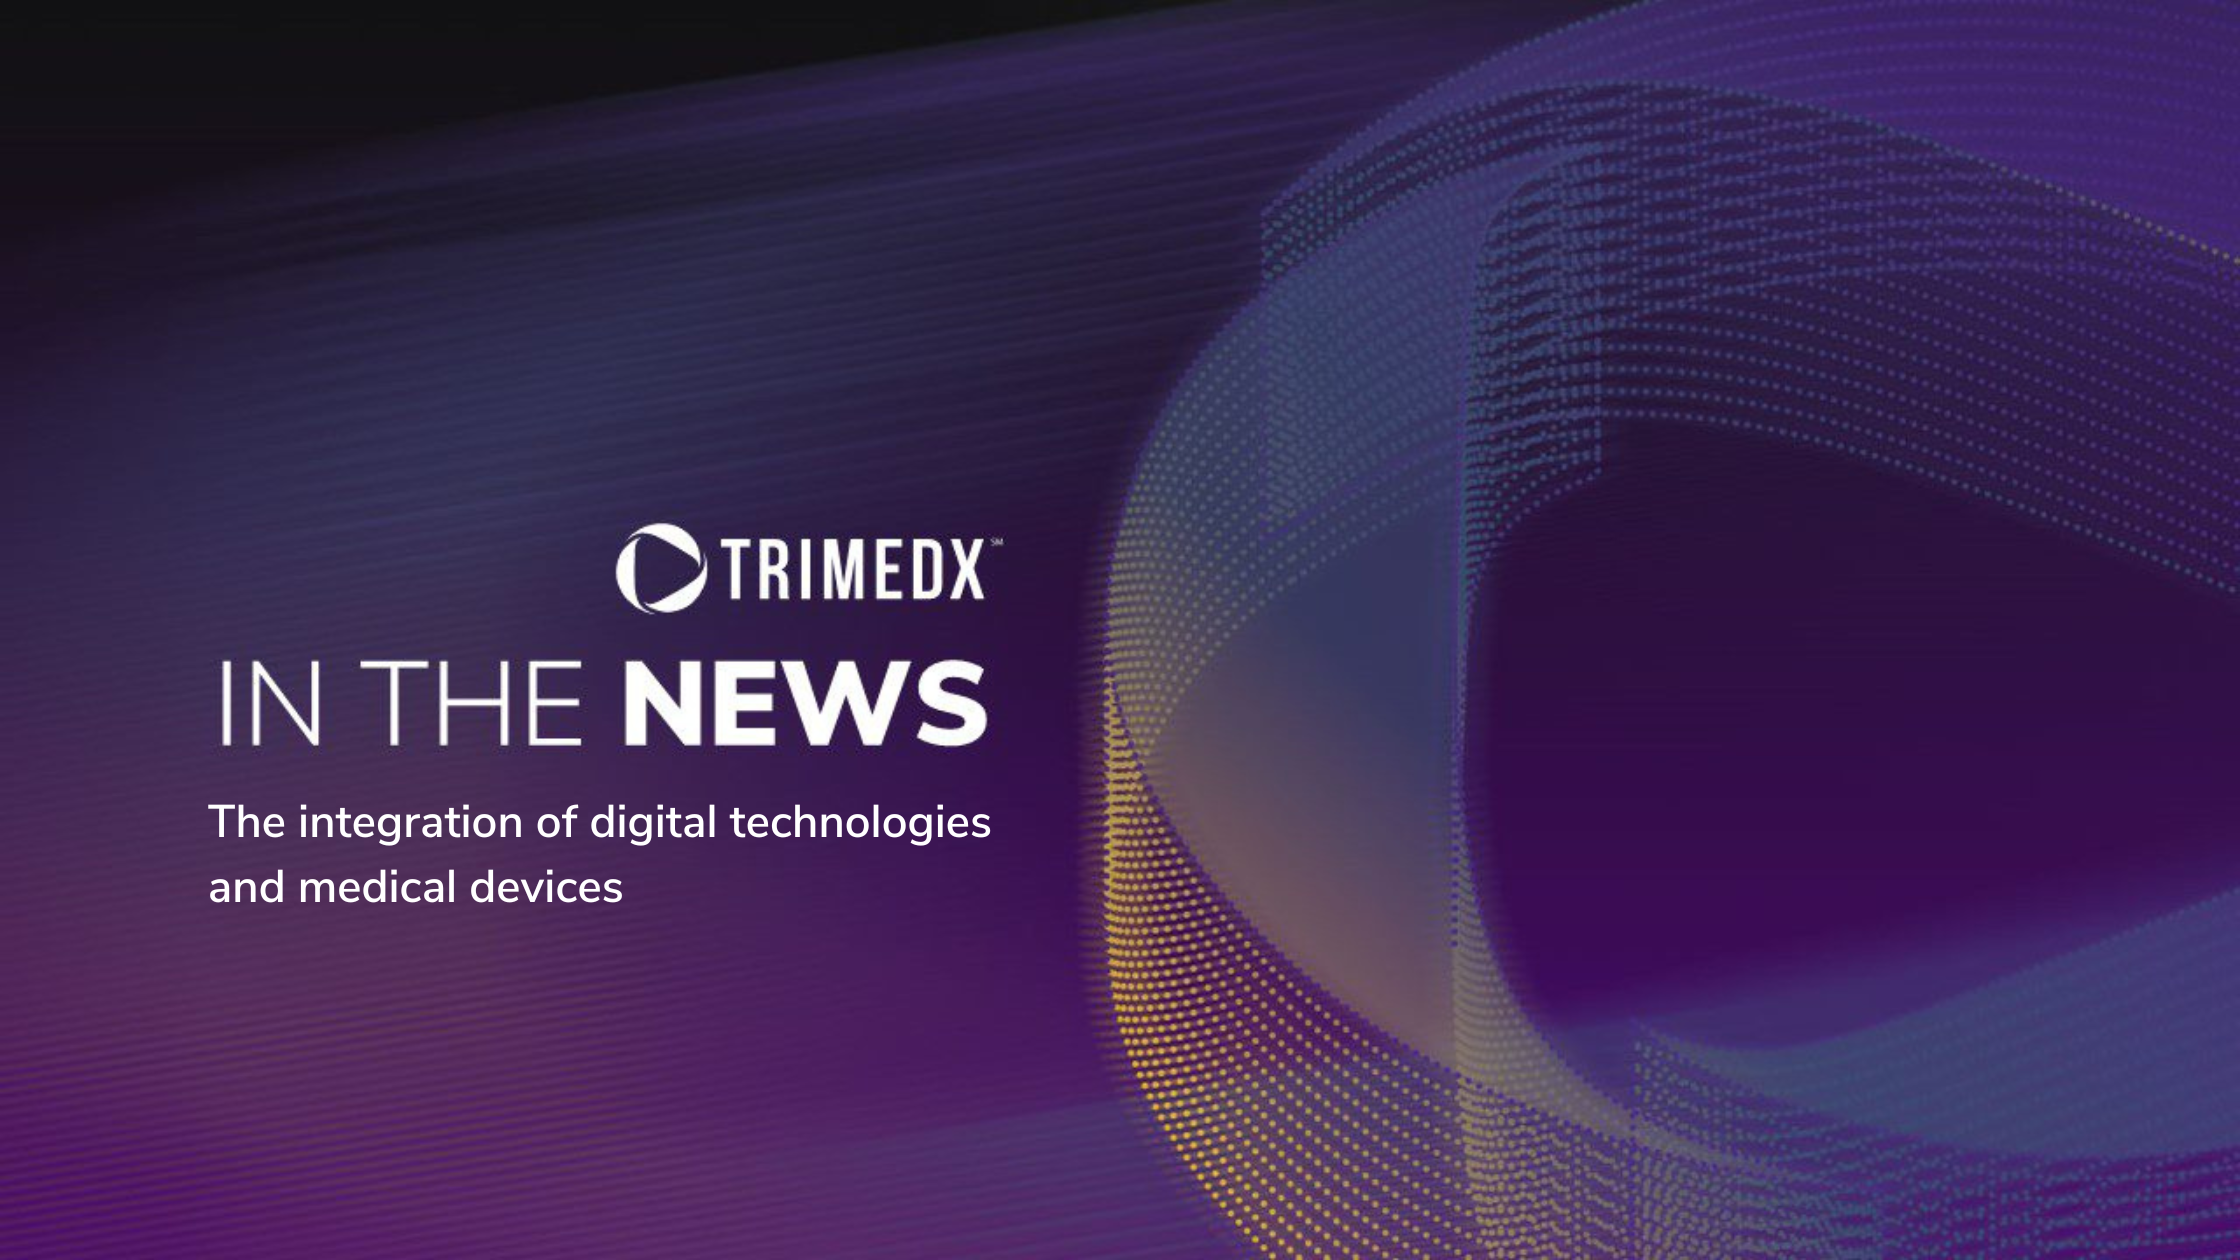 TRIMEDX IN THE NEWS: The integration of digital technologies and medical devices